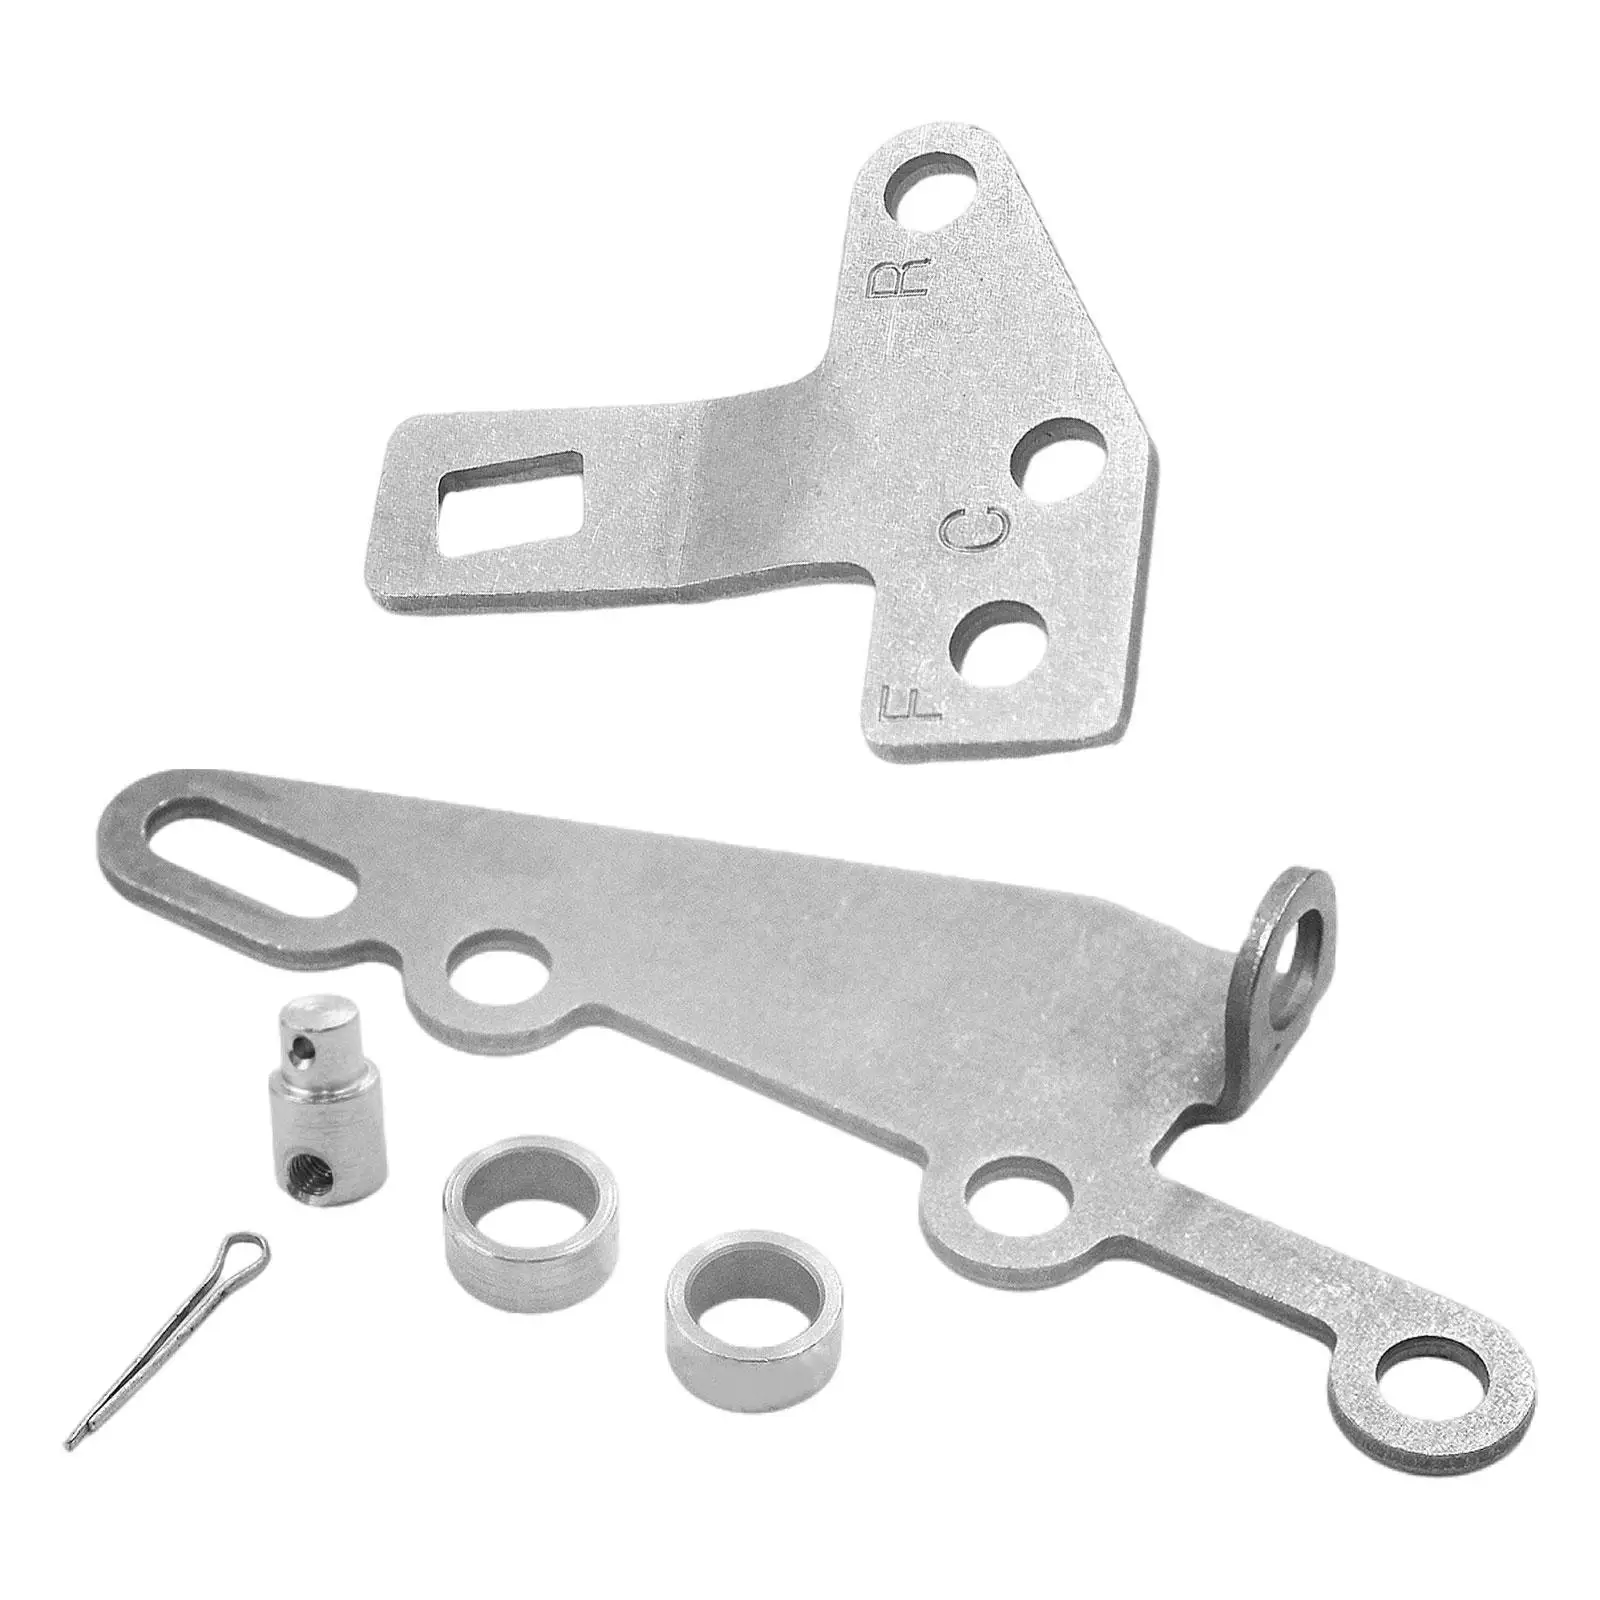 Shifter Bracket & Lever Kit Replacement Repair Parts 35498 for TH400 TH350 4L60 TH200-4R H250/200 Professional